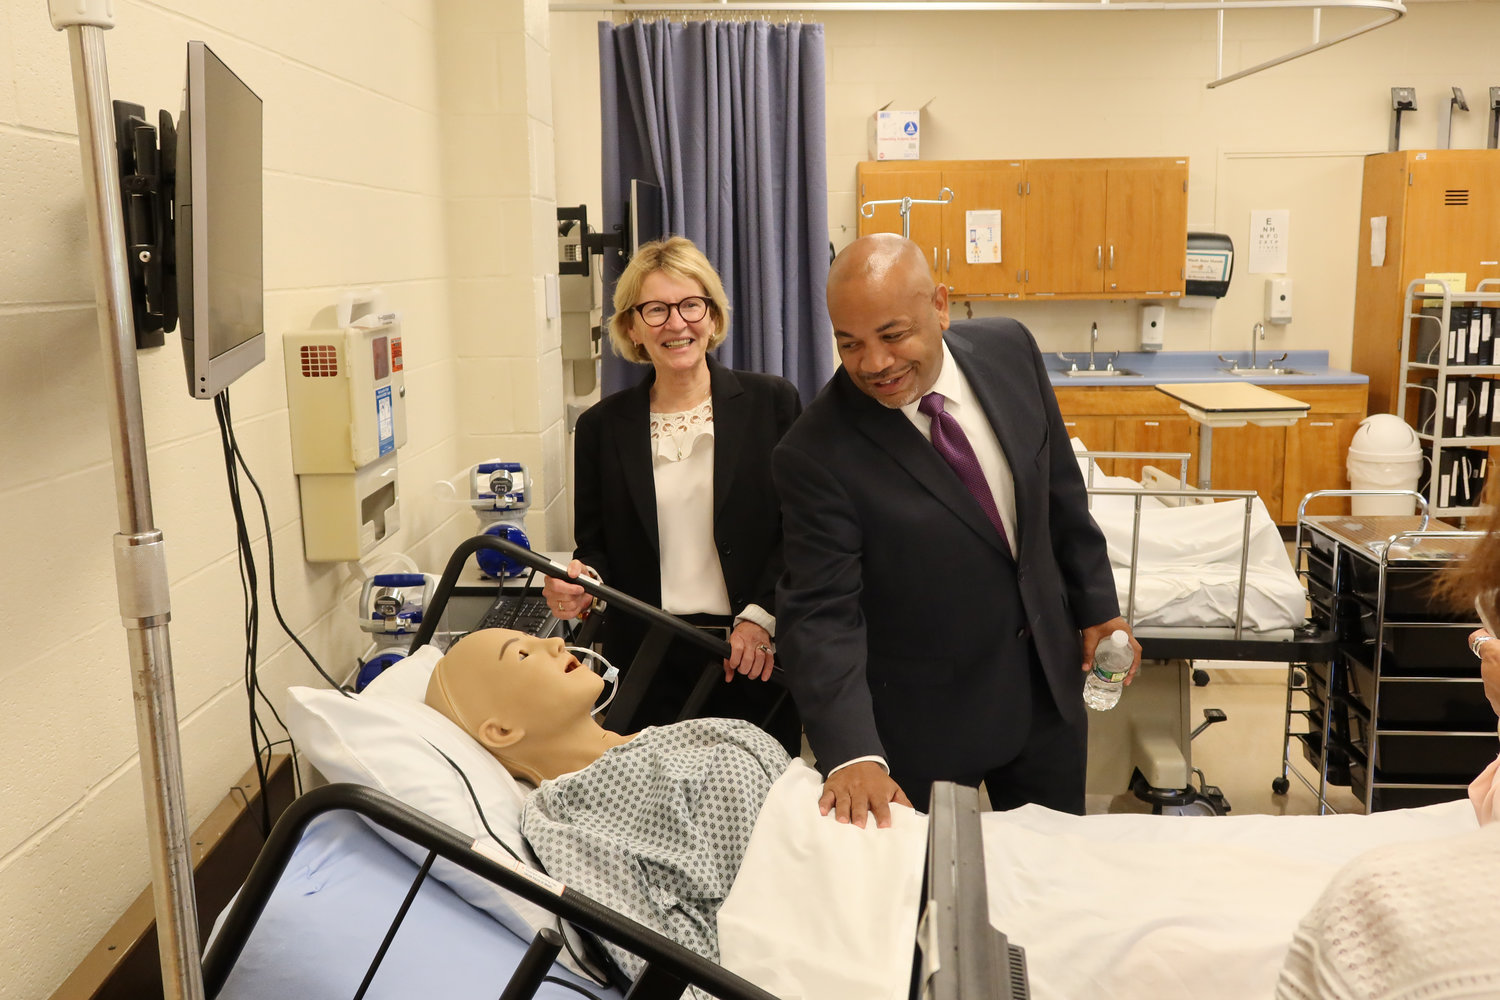 Assemblymember Aileen Gunther, left, and Speaker Carl Heastie pictured at SUNY Sullivan, announcing $700,000 to improve and expand the college's Health Studies programs by updating facilities and improving access to technologies.